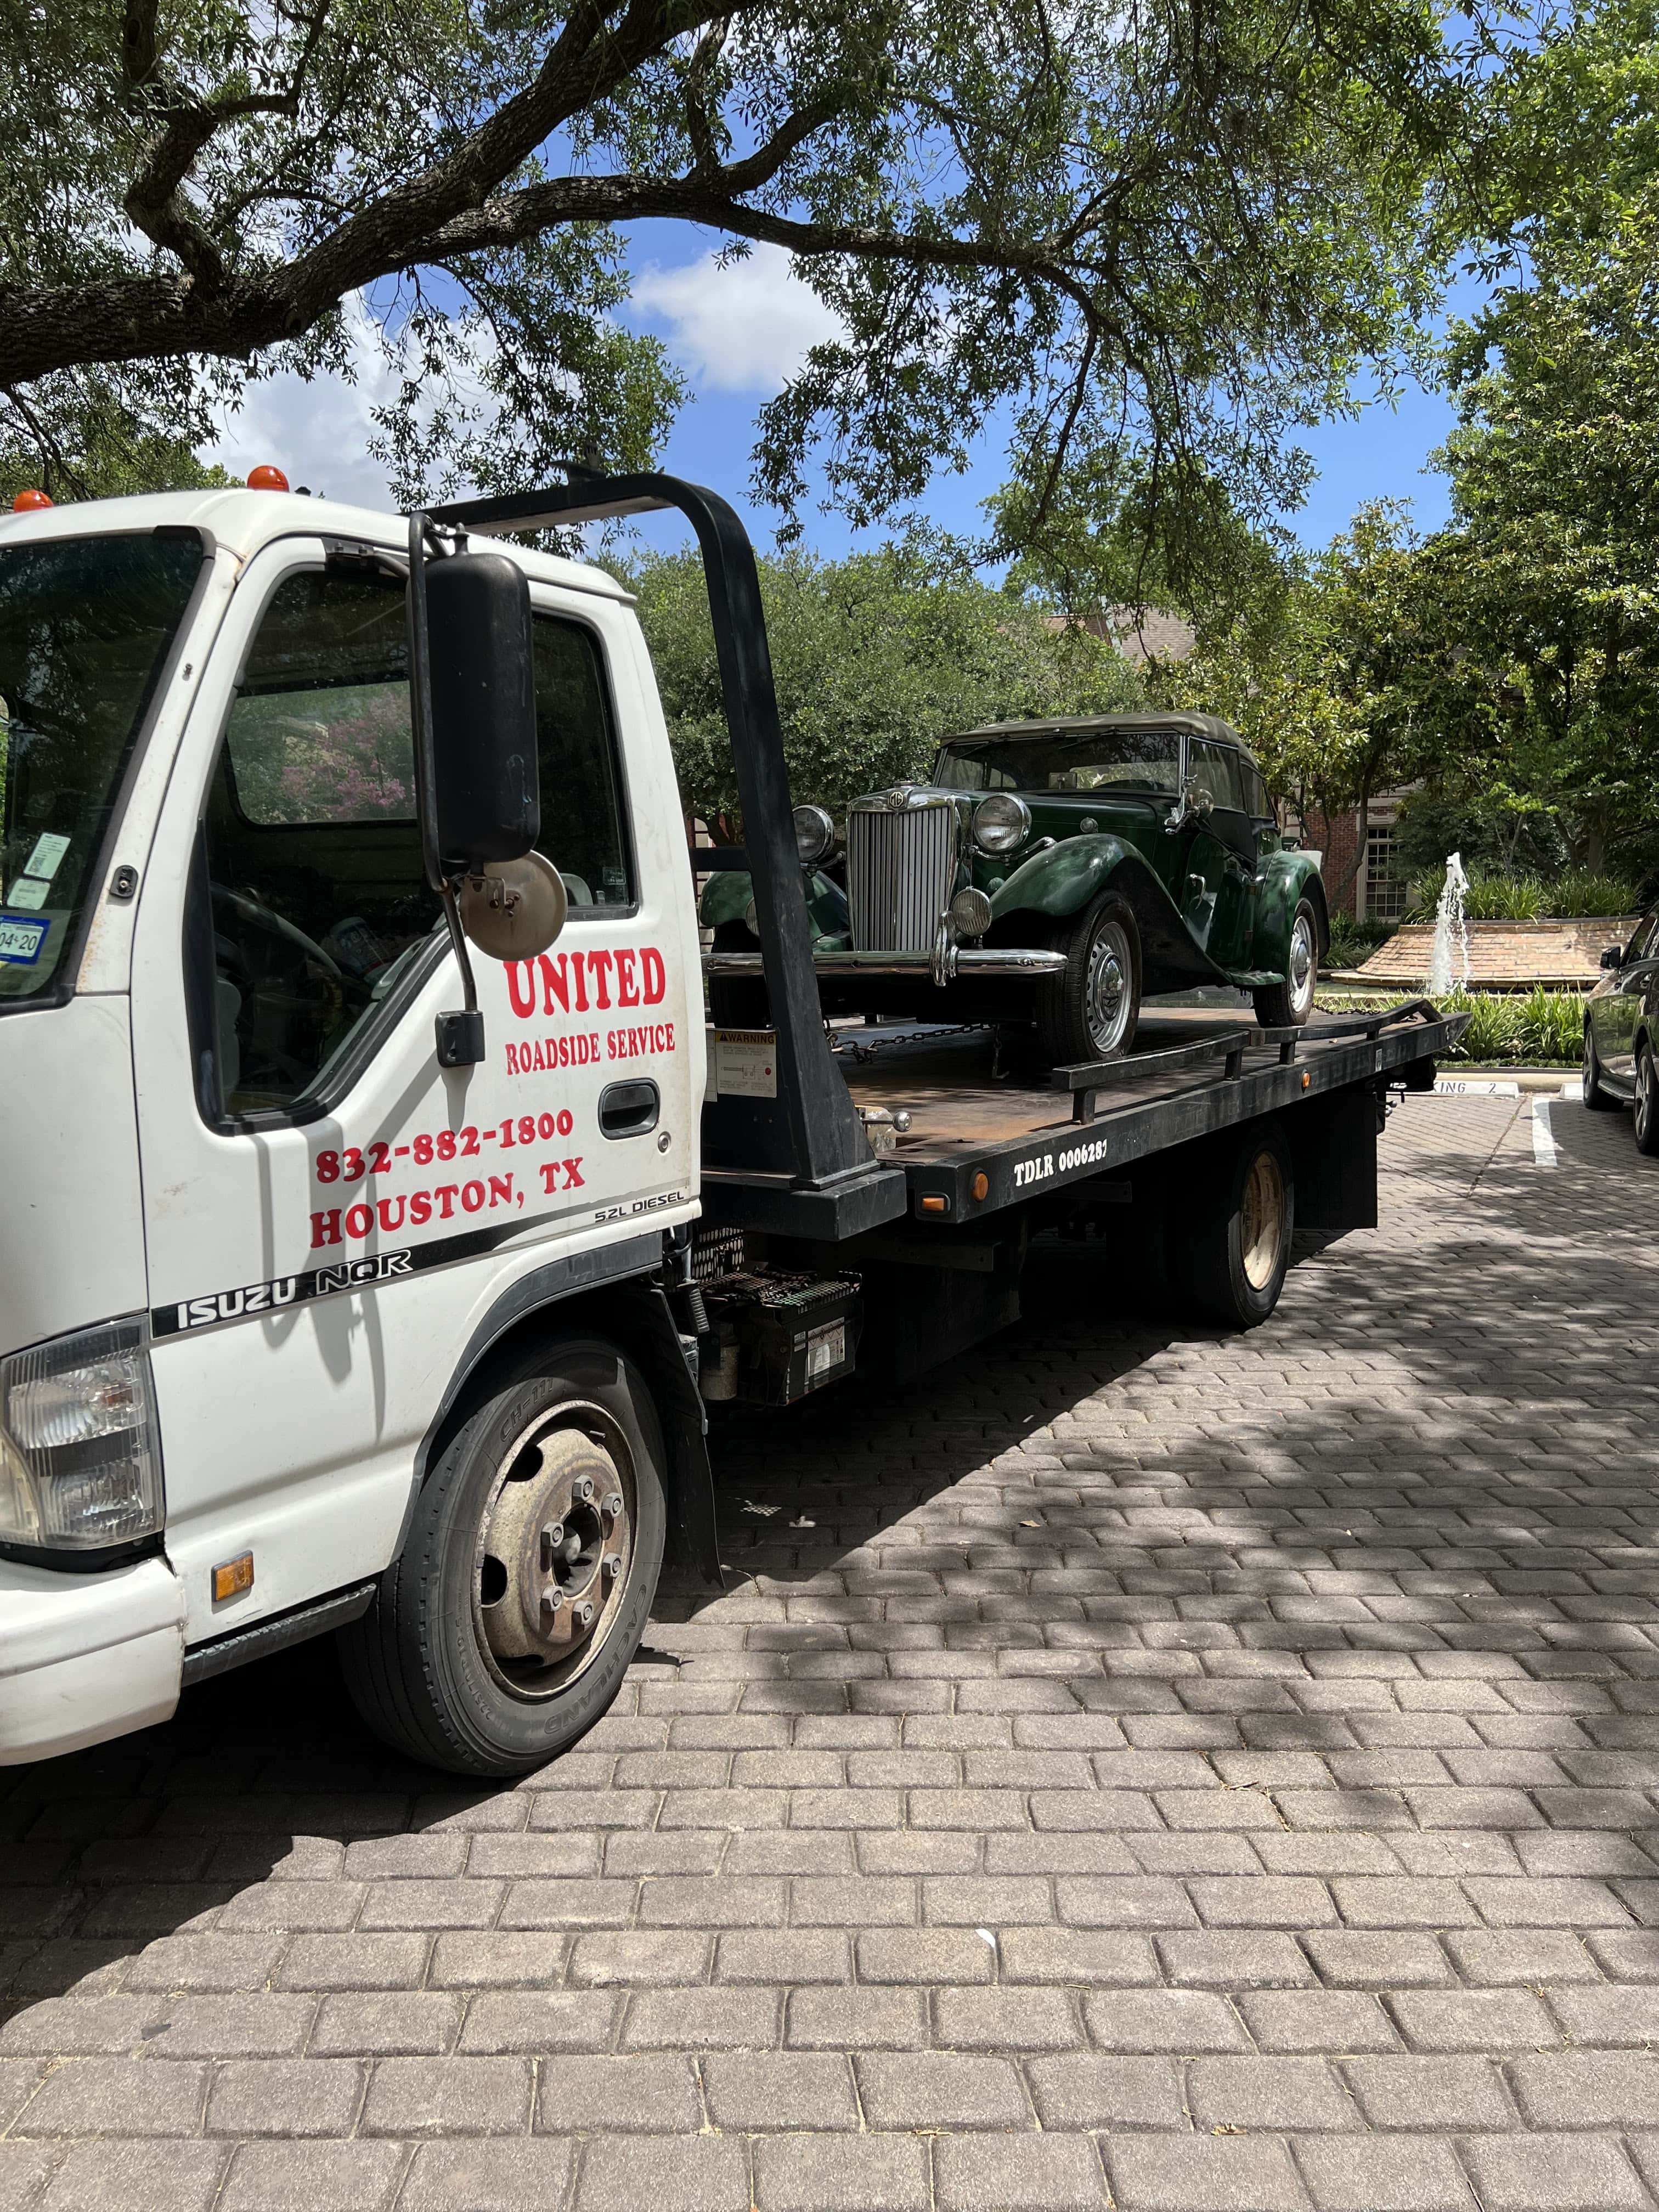 United Roadside & Towing Service - Houston, TX, US, 24 hour towing near me